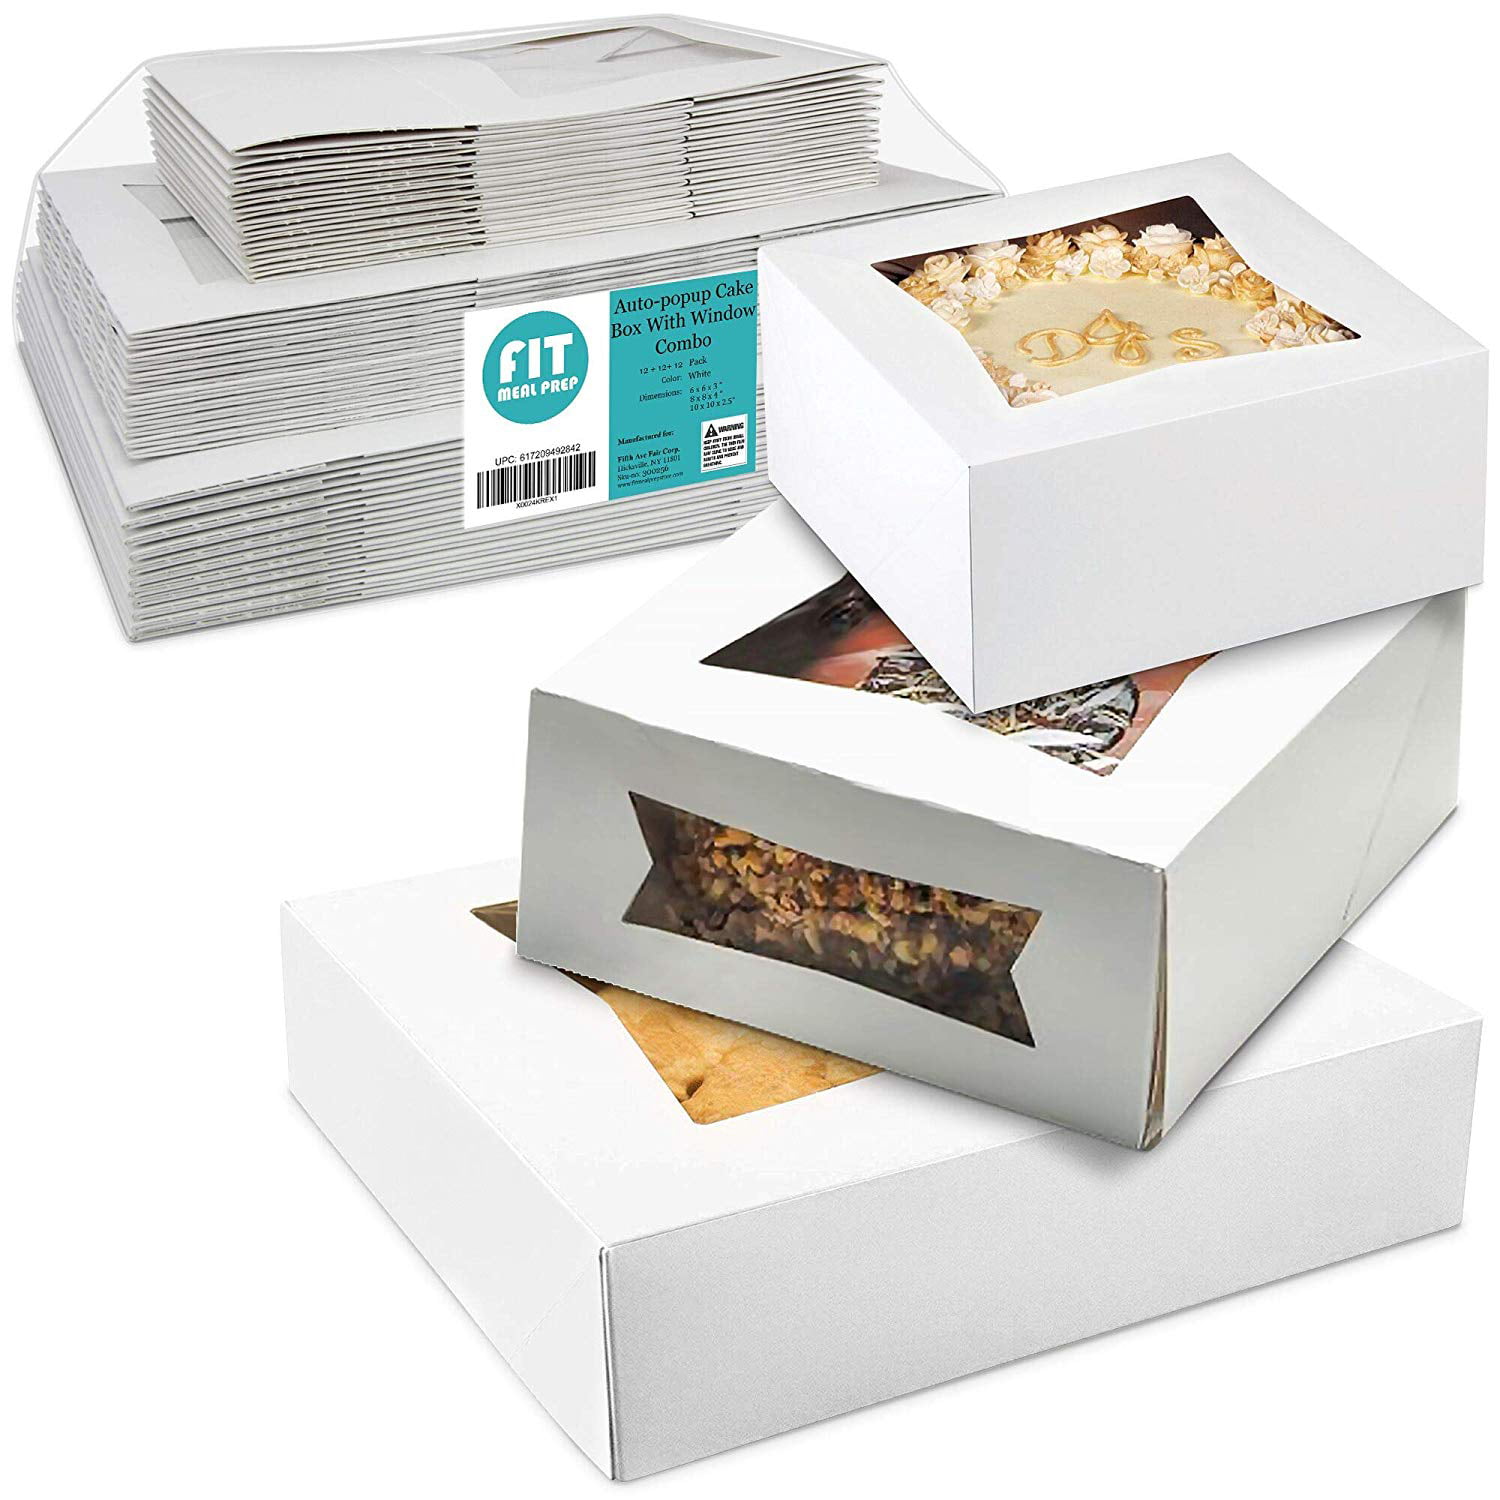 25 WINDOW Bakery Box 8x8x4 WHITE for Cupcake Cookie Candy Favor Gift.